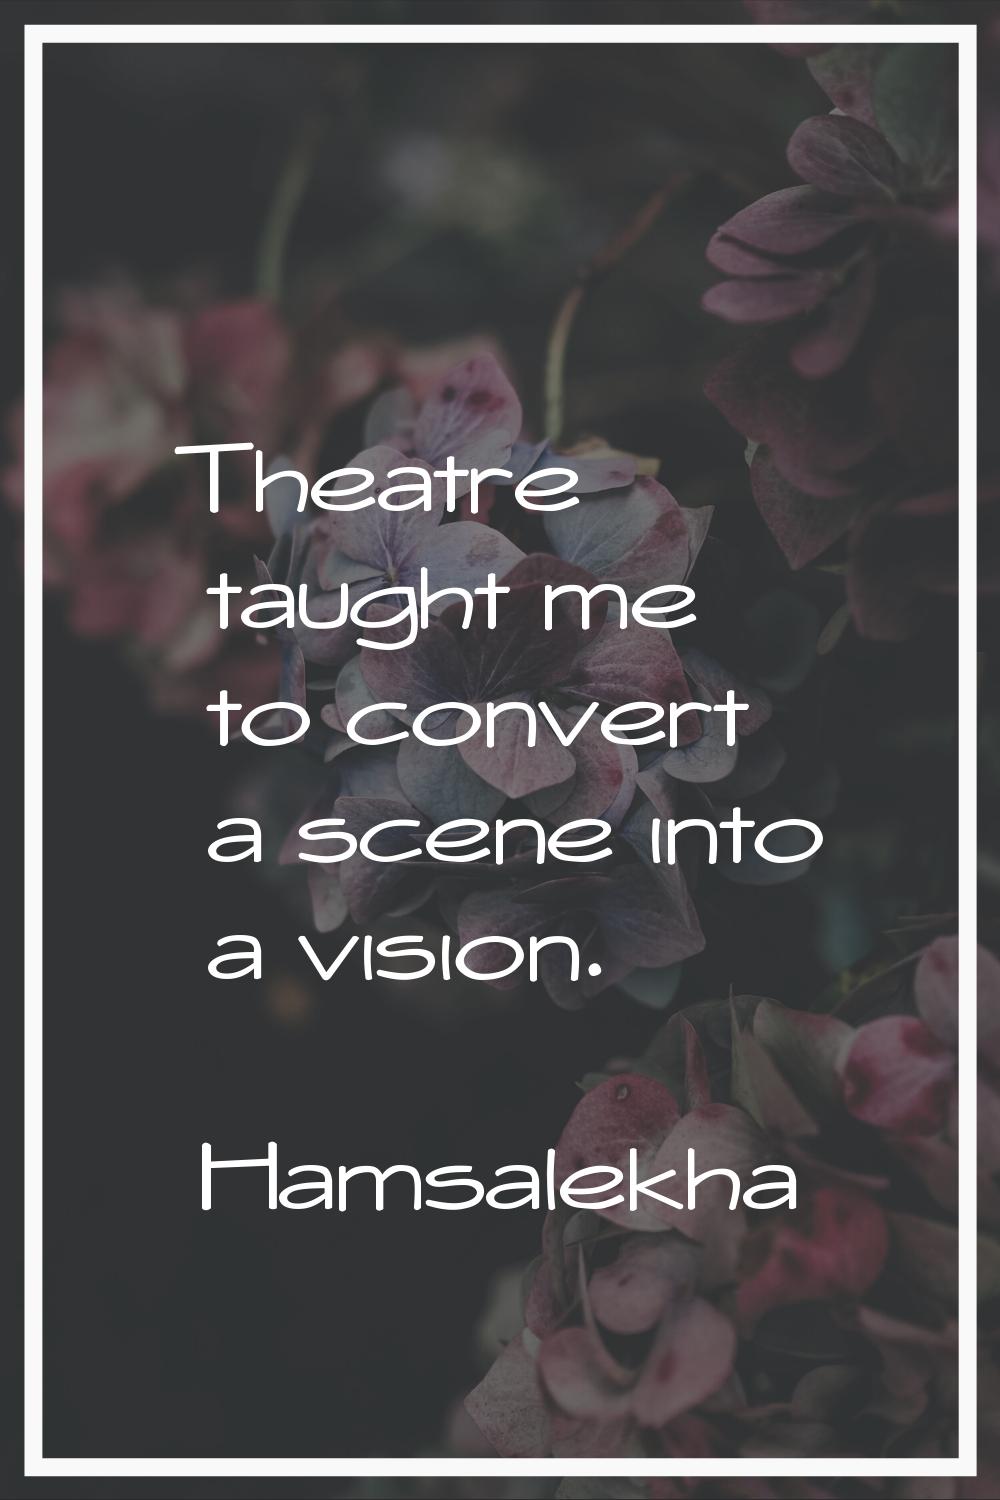 Theatre taught me to convert a scene into a vision.